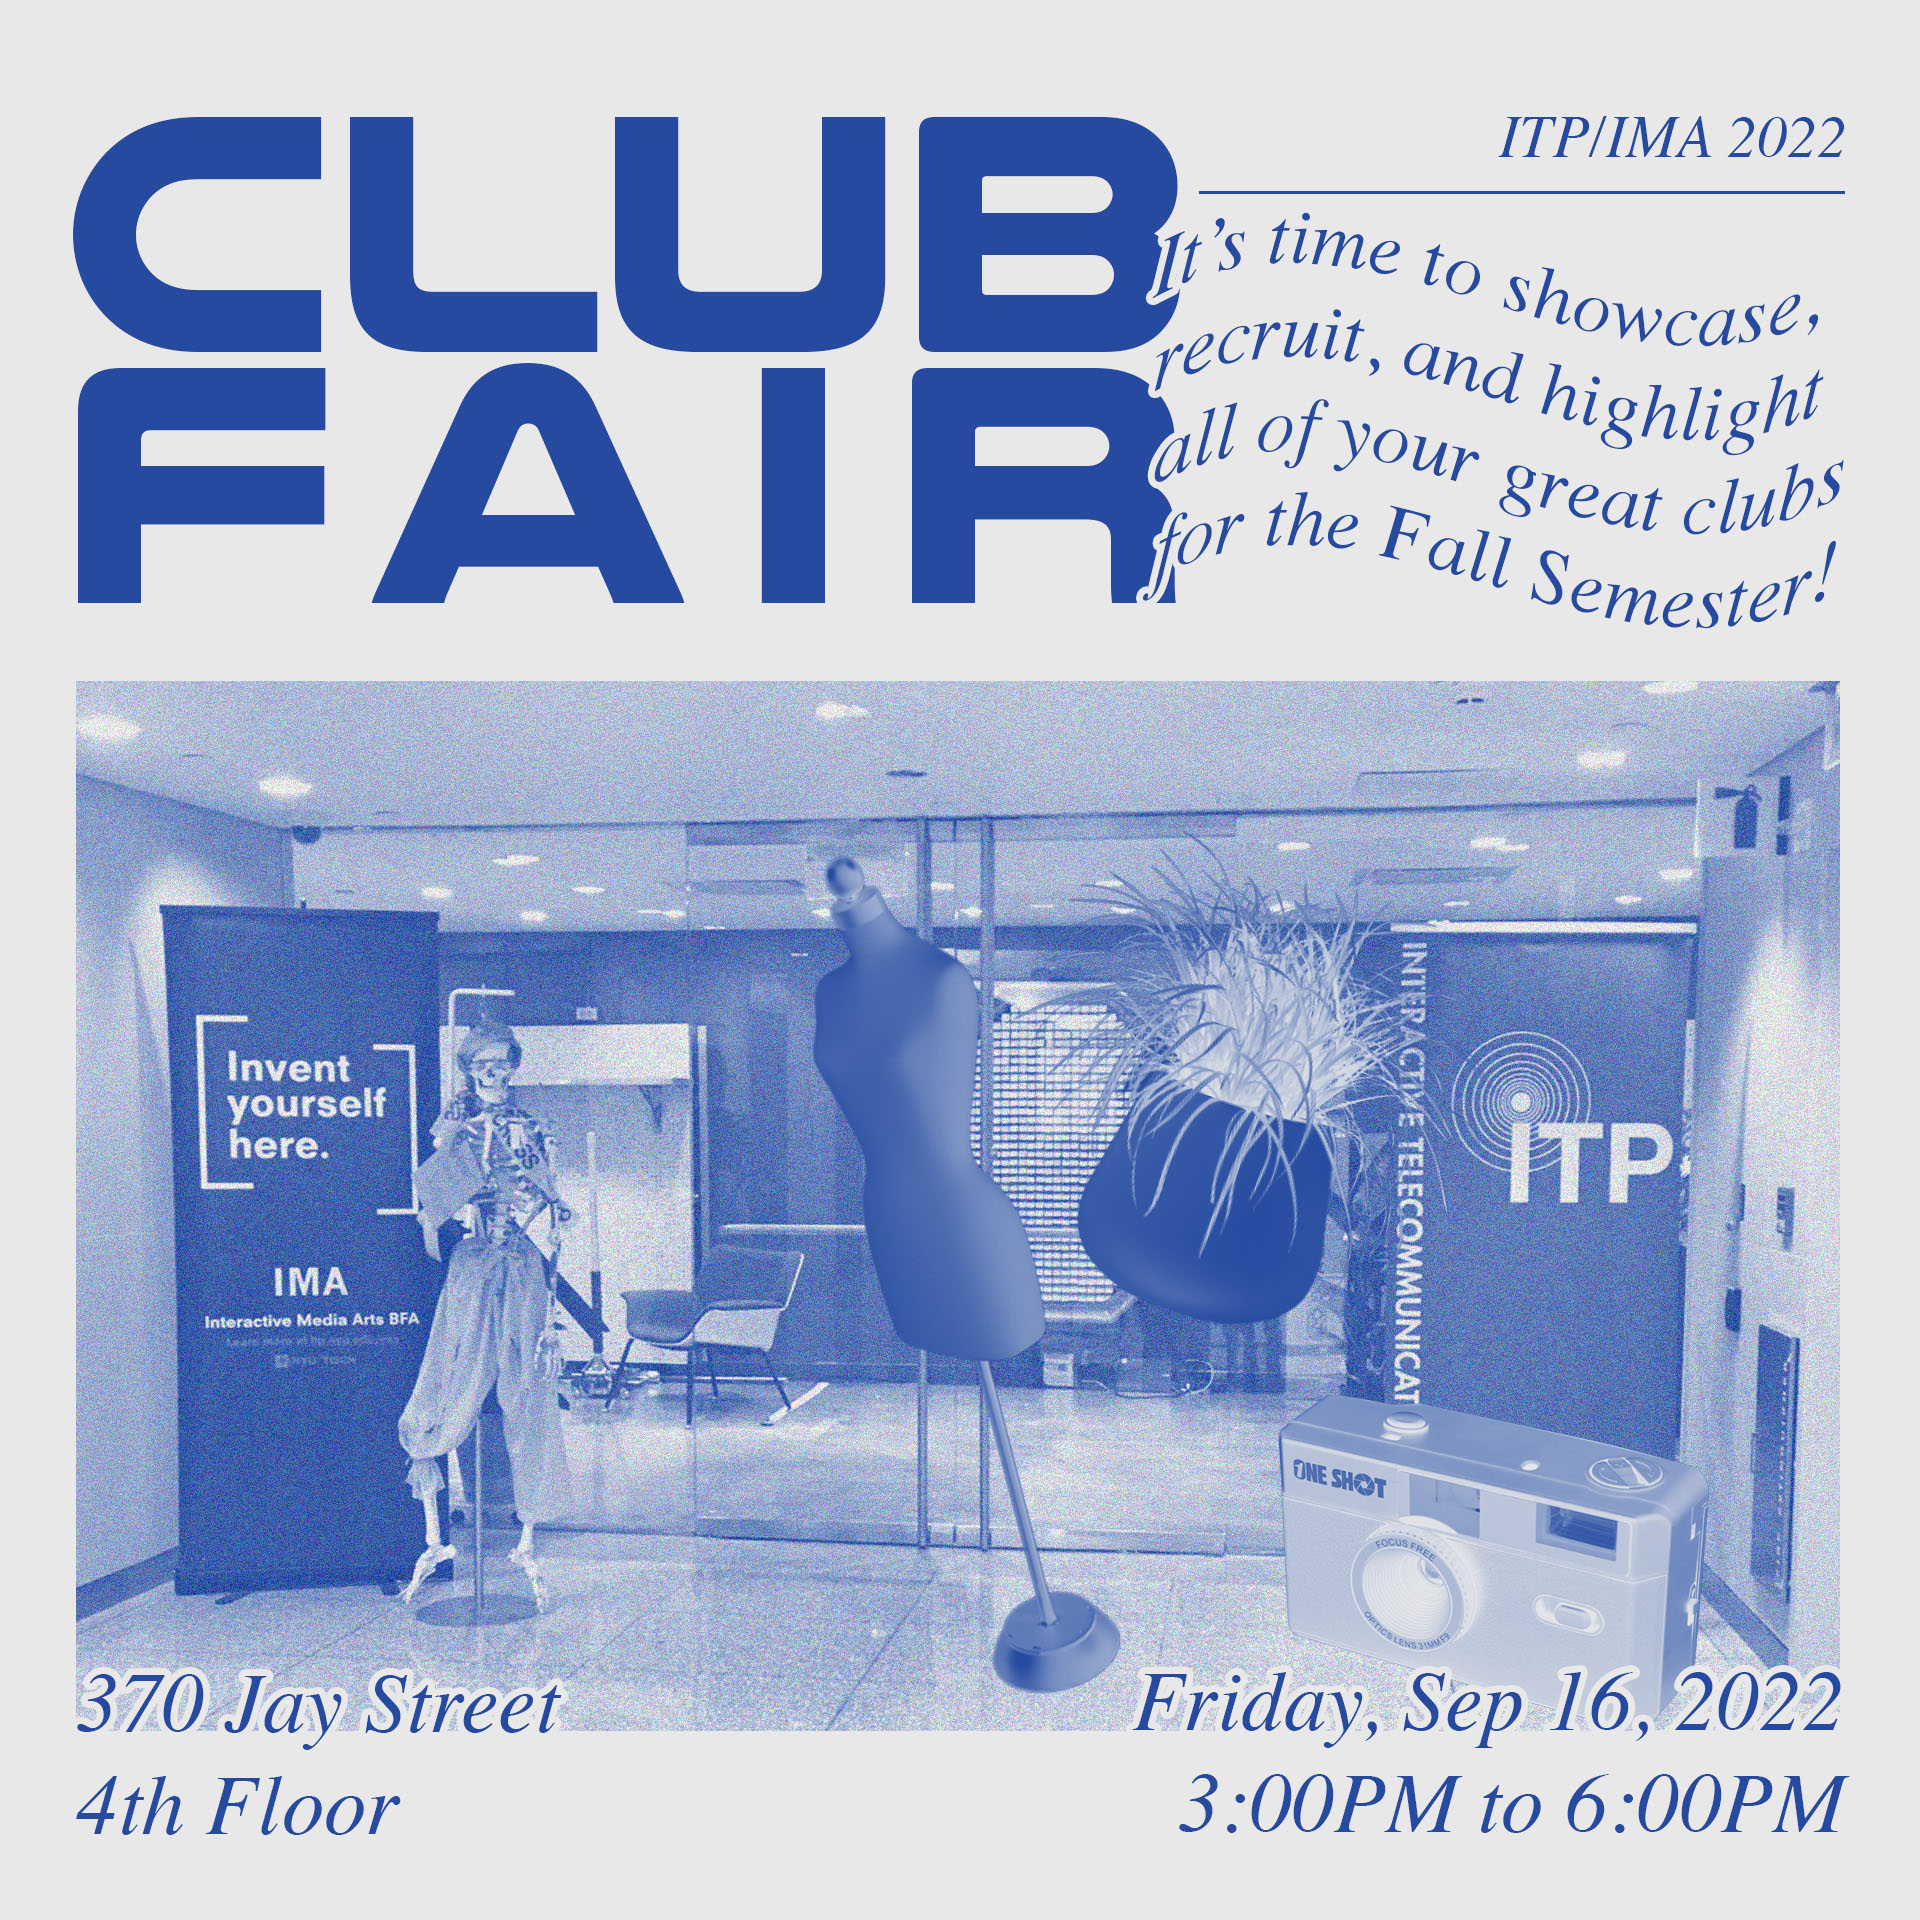 Do you want to promote your club or check out all of the clubs at ITP/IMA? Check out the club fair and connect with the ITP/IMA Community!